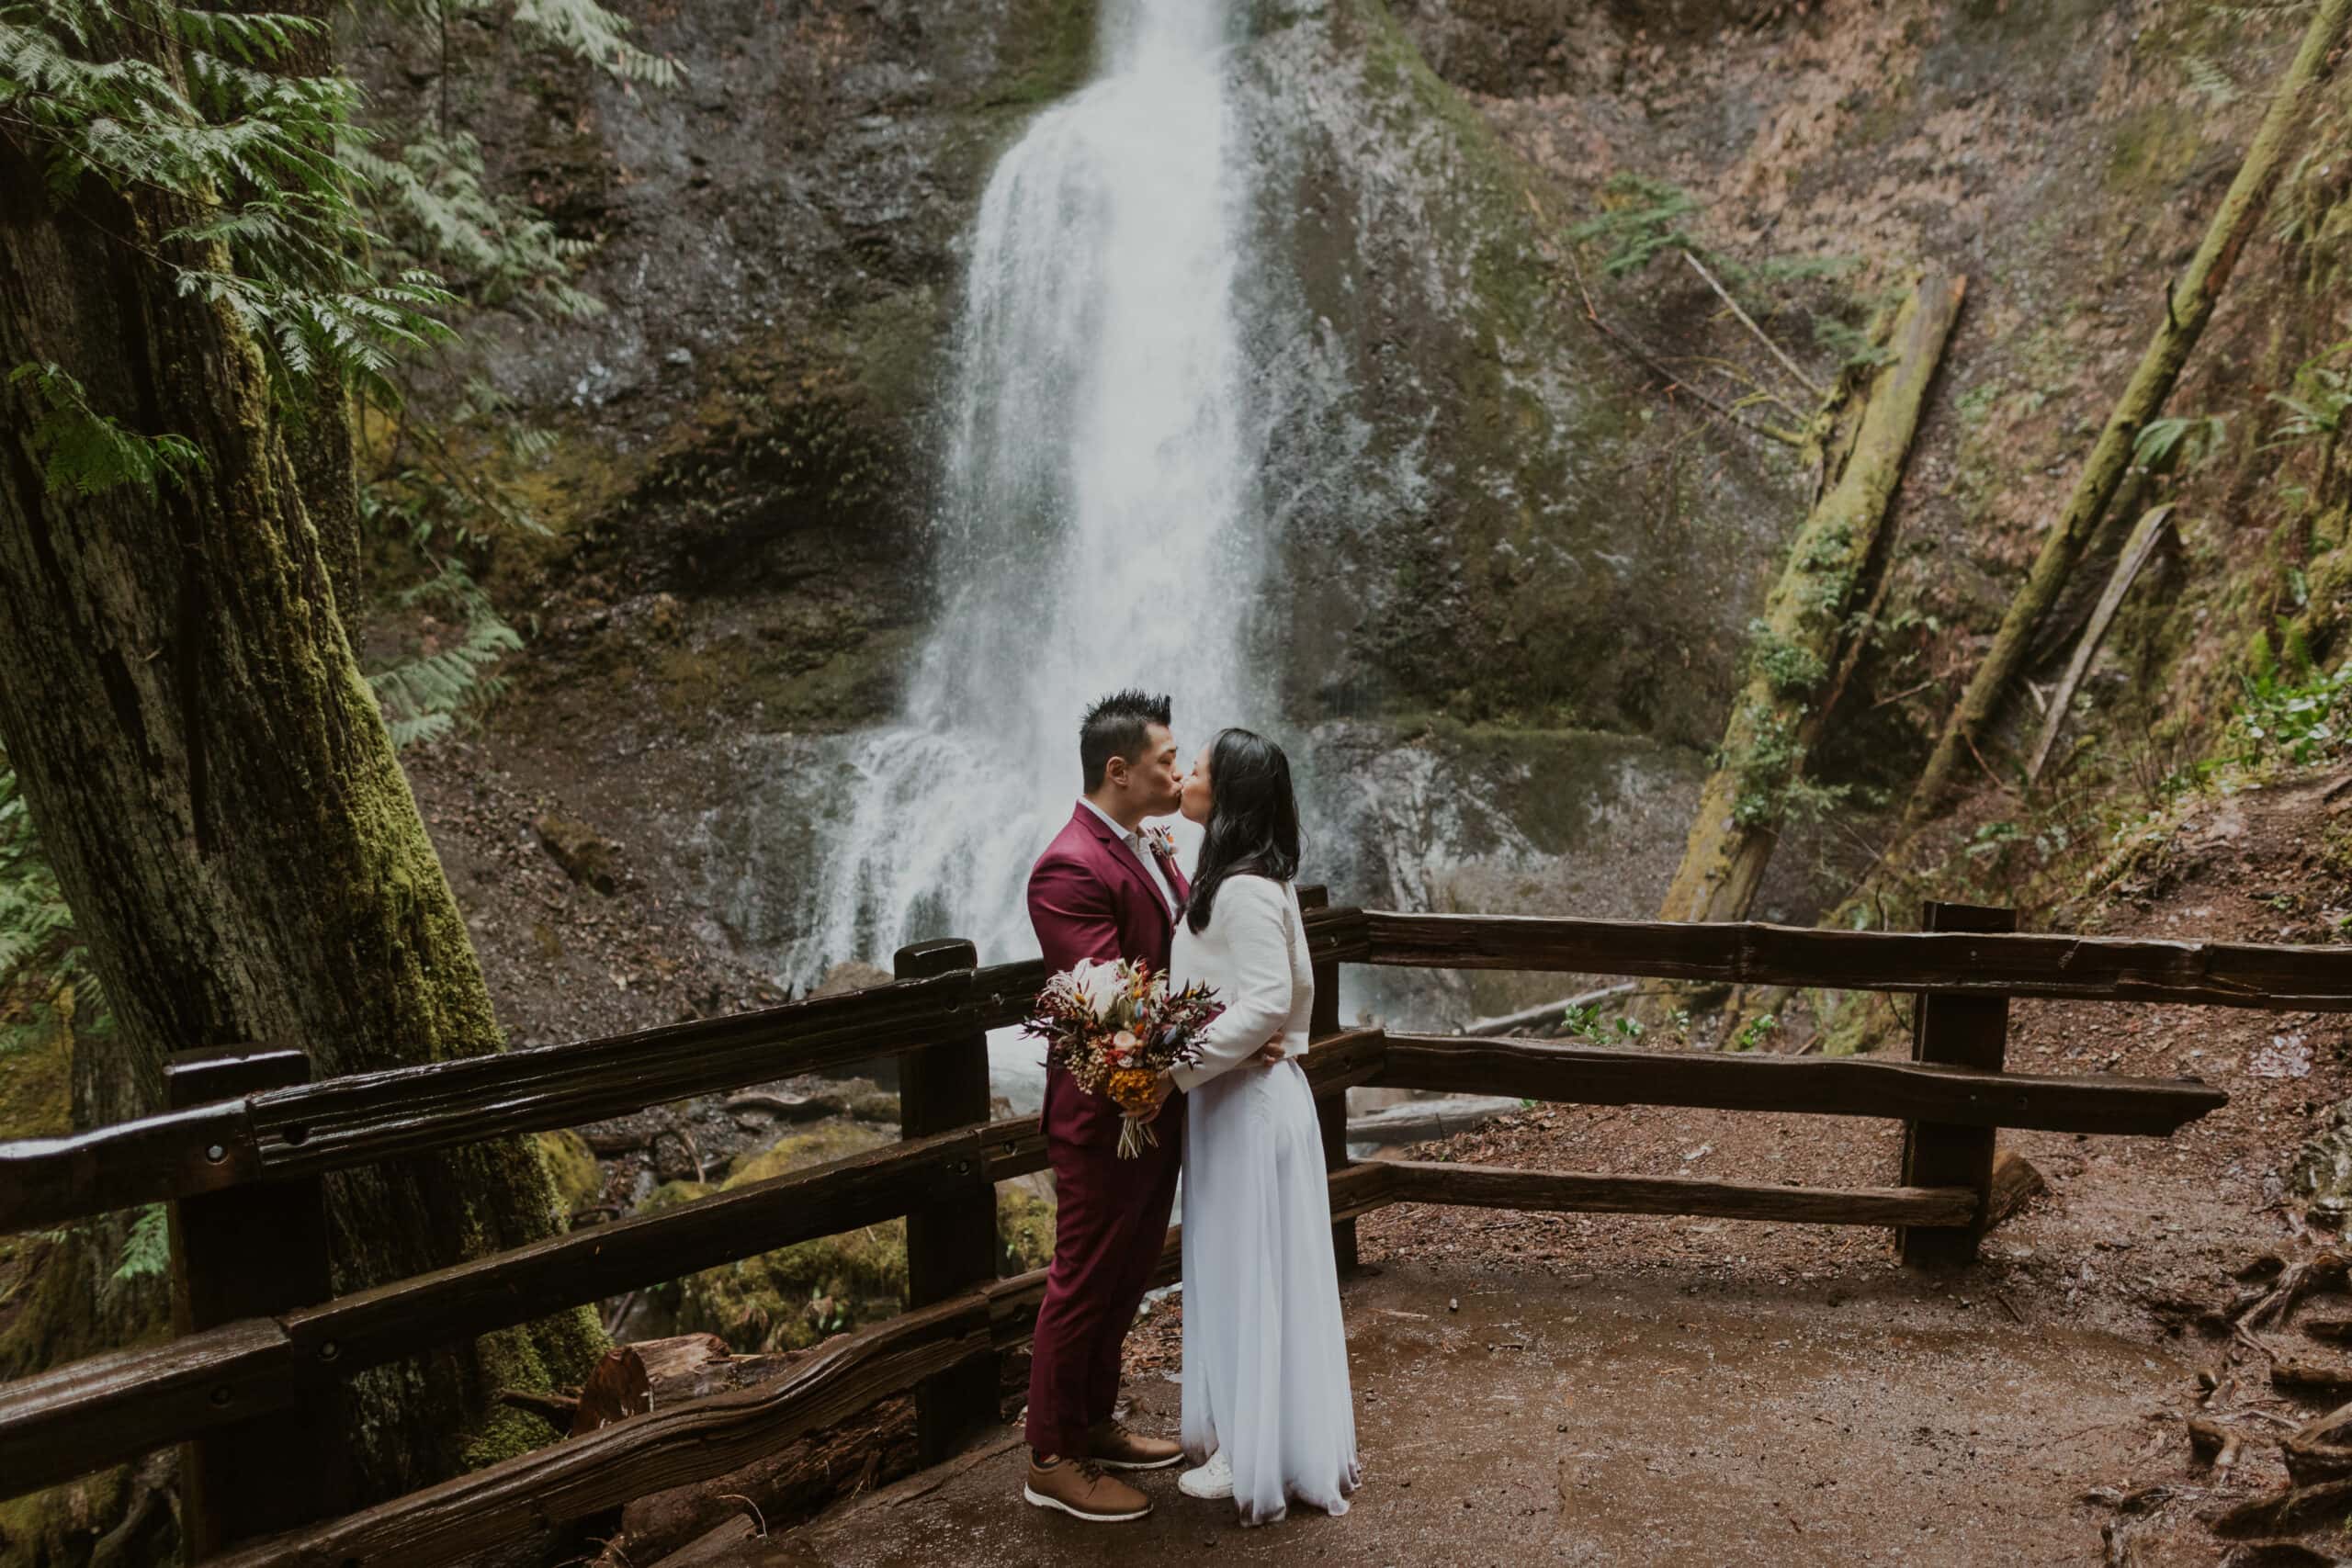 A couple in wedding attire kissing in front of Marymere Falls.